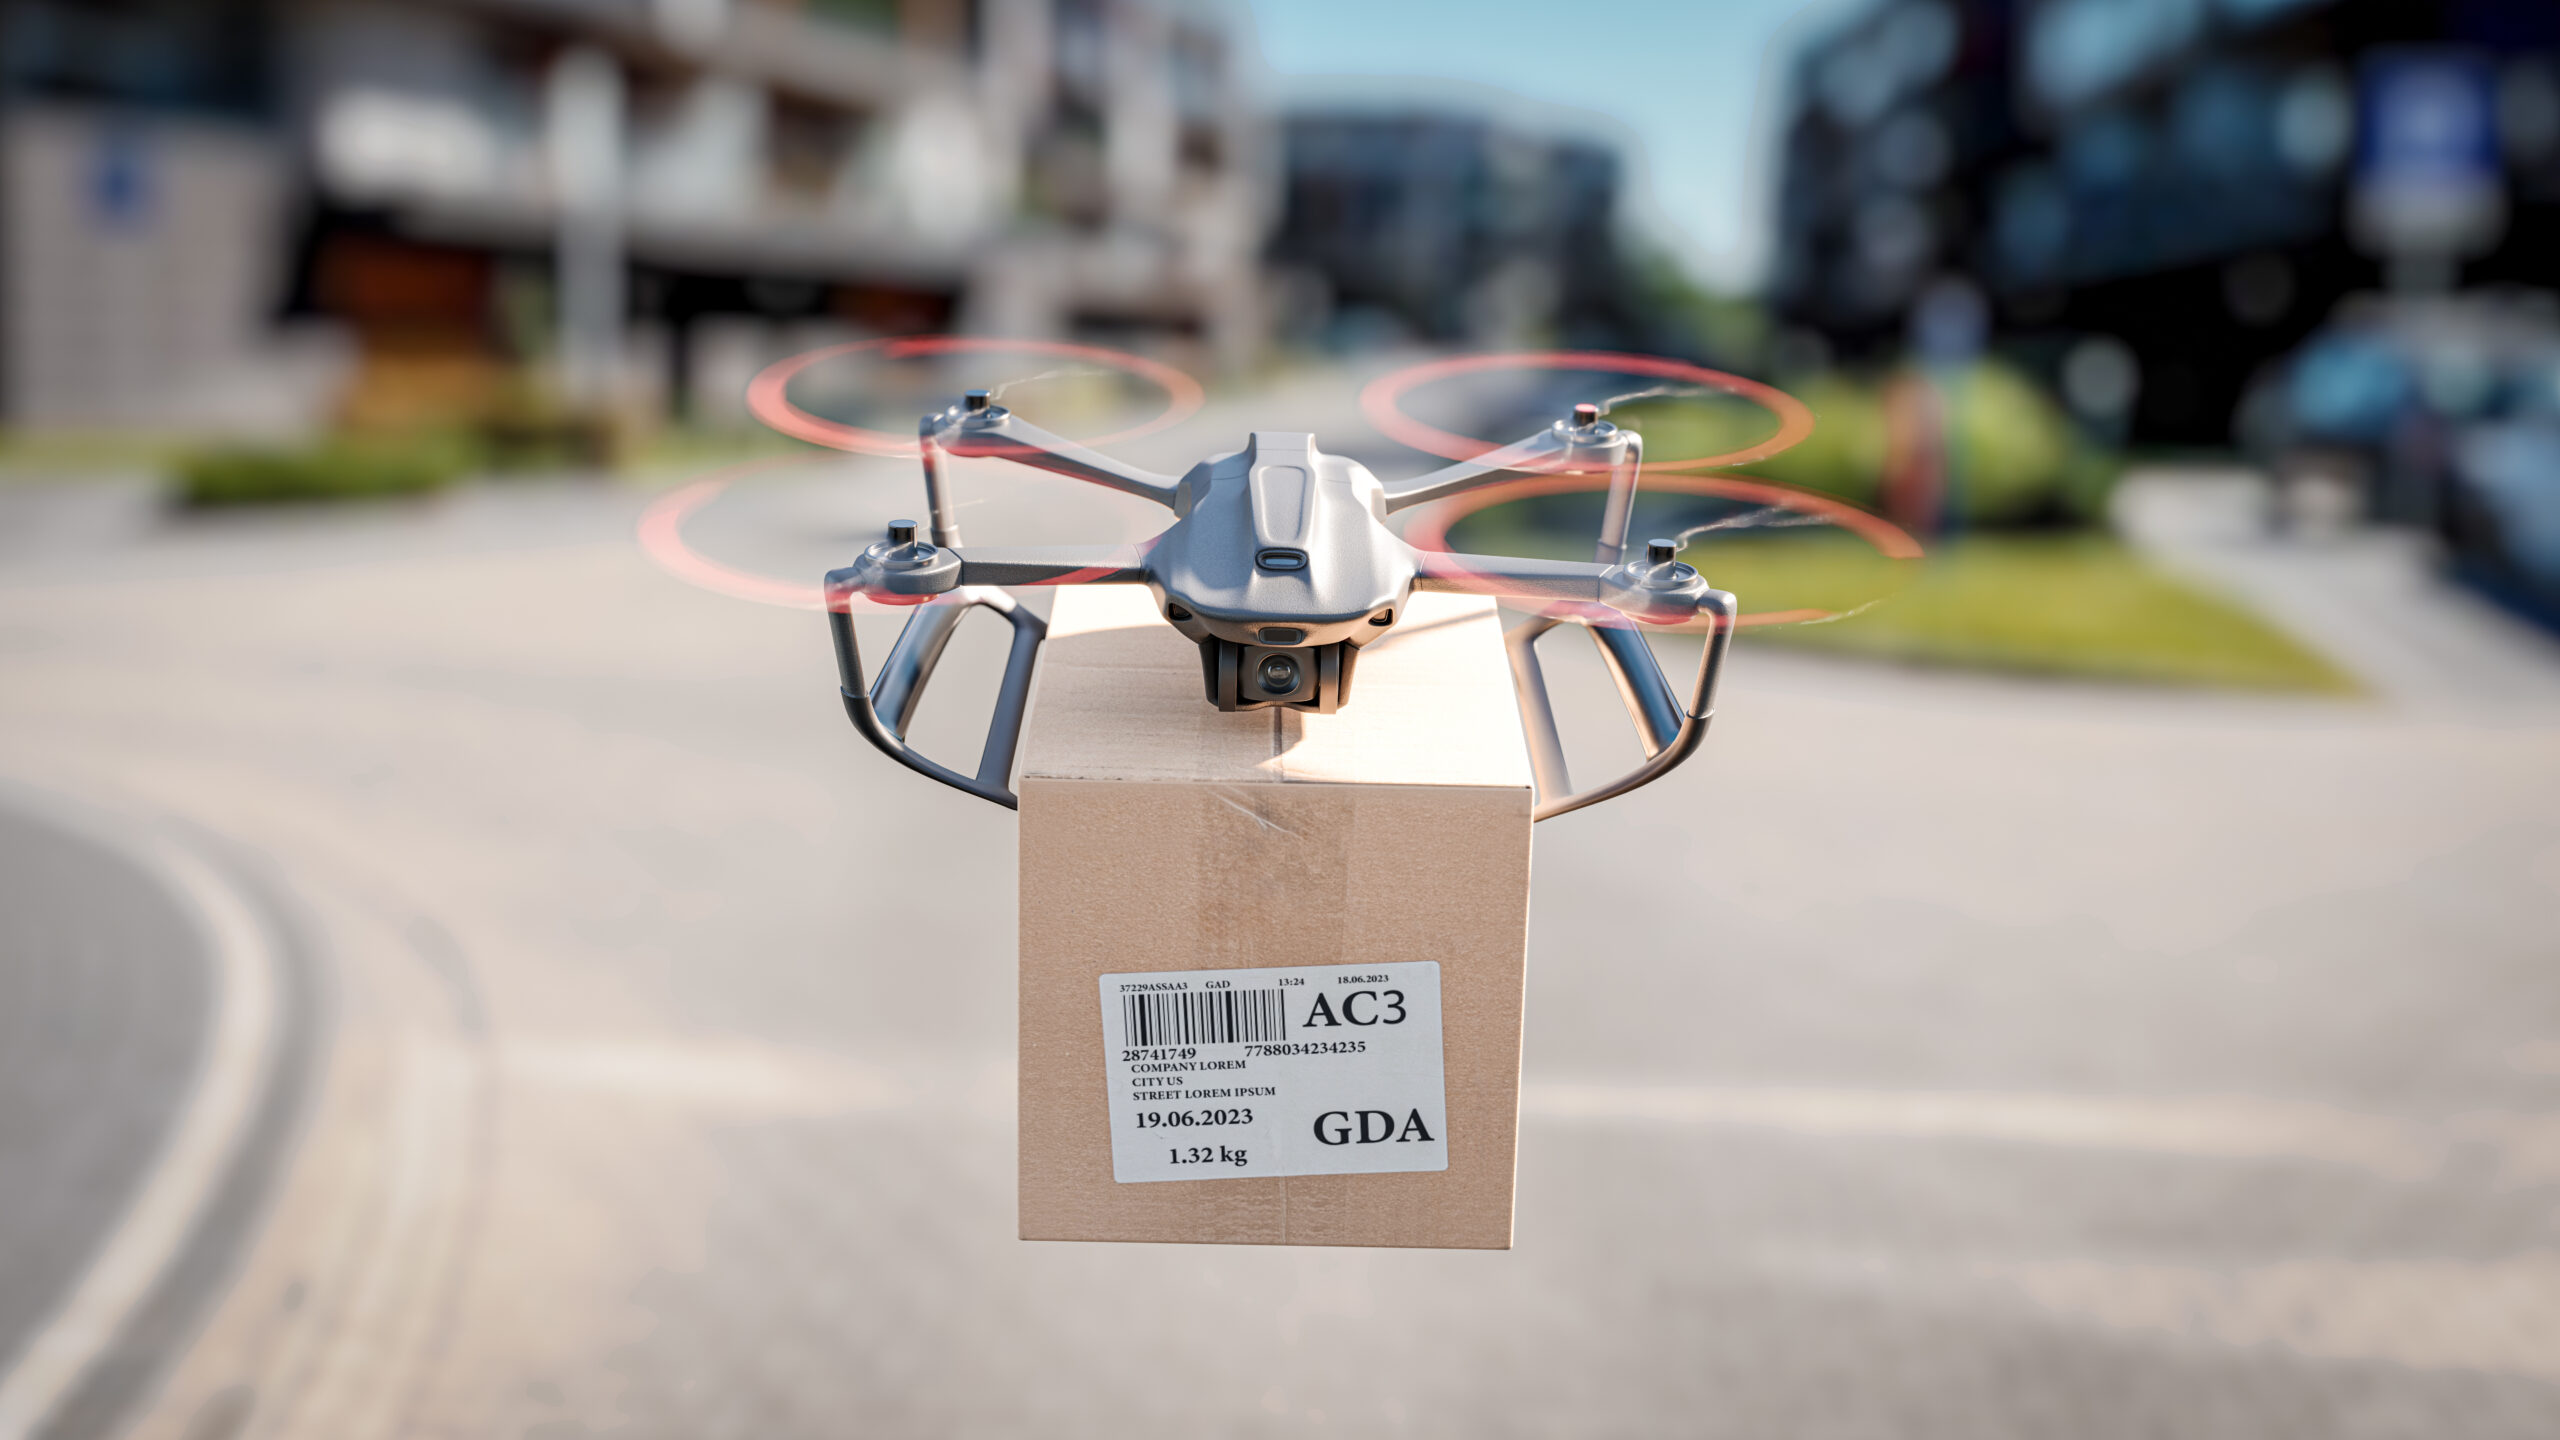 Last mile delivery technology concept: A delivery drone is flying between residential buildings - the concept of delivering packages using an unmanned drone